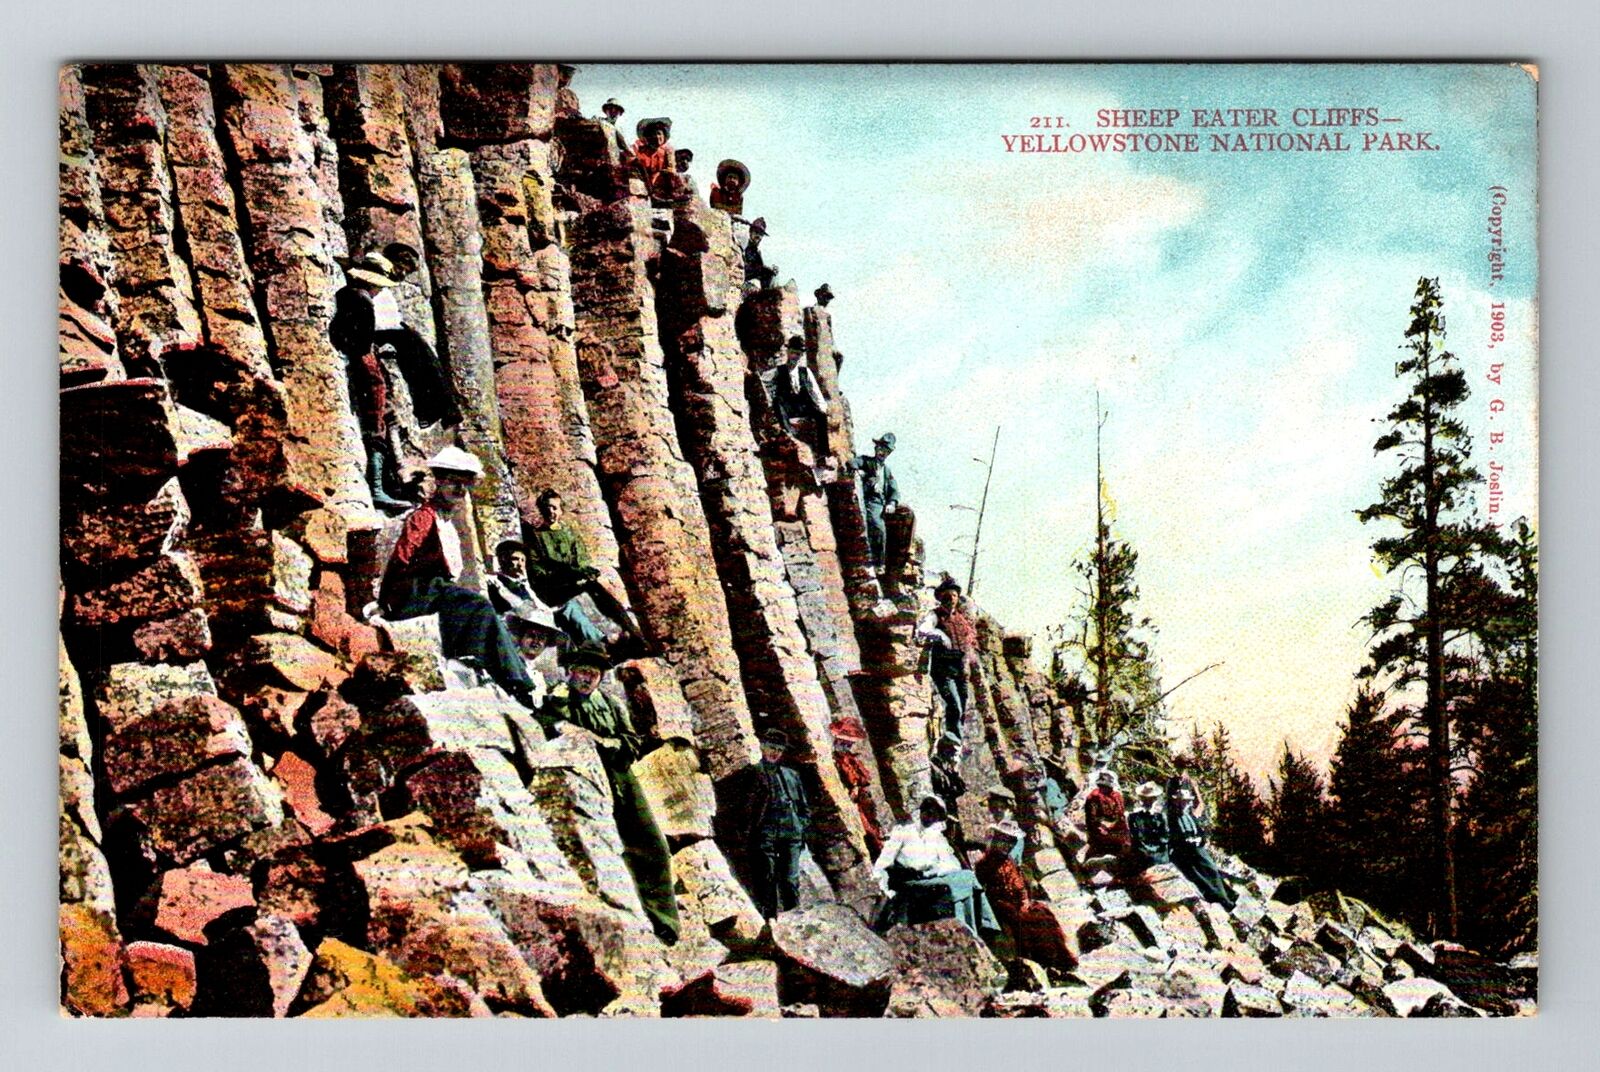 Yellowstone Natl Park WY-Wyoming, Sheep Eater Cliffs, Vintage Postcard